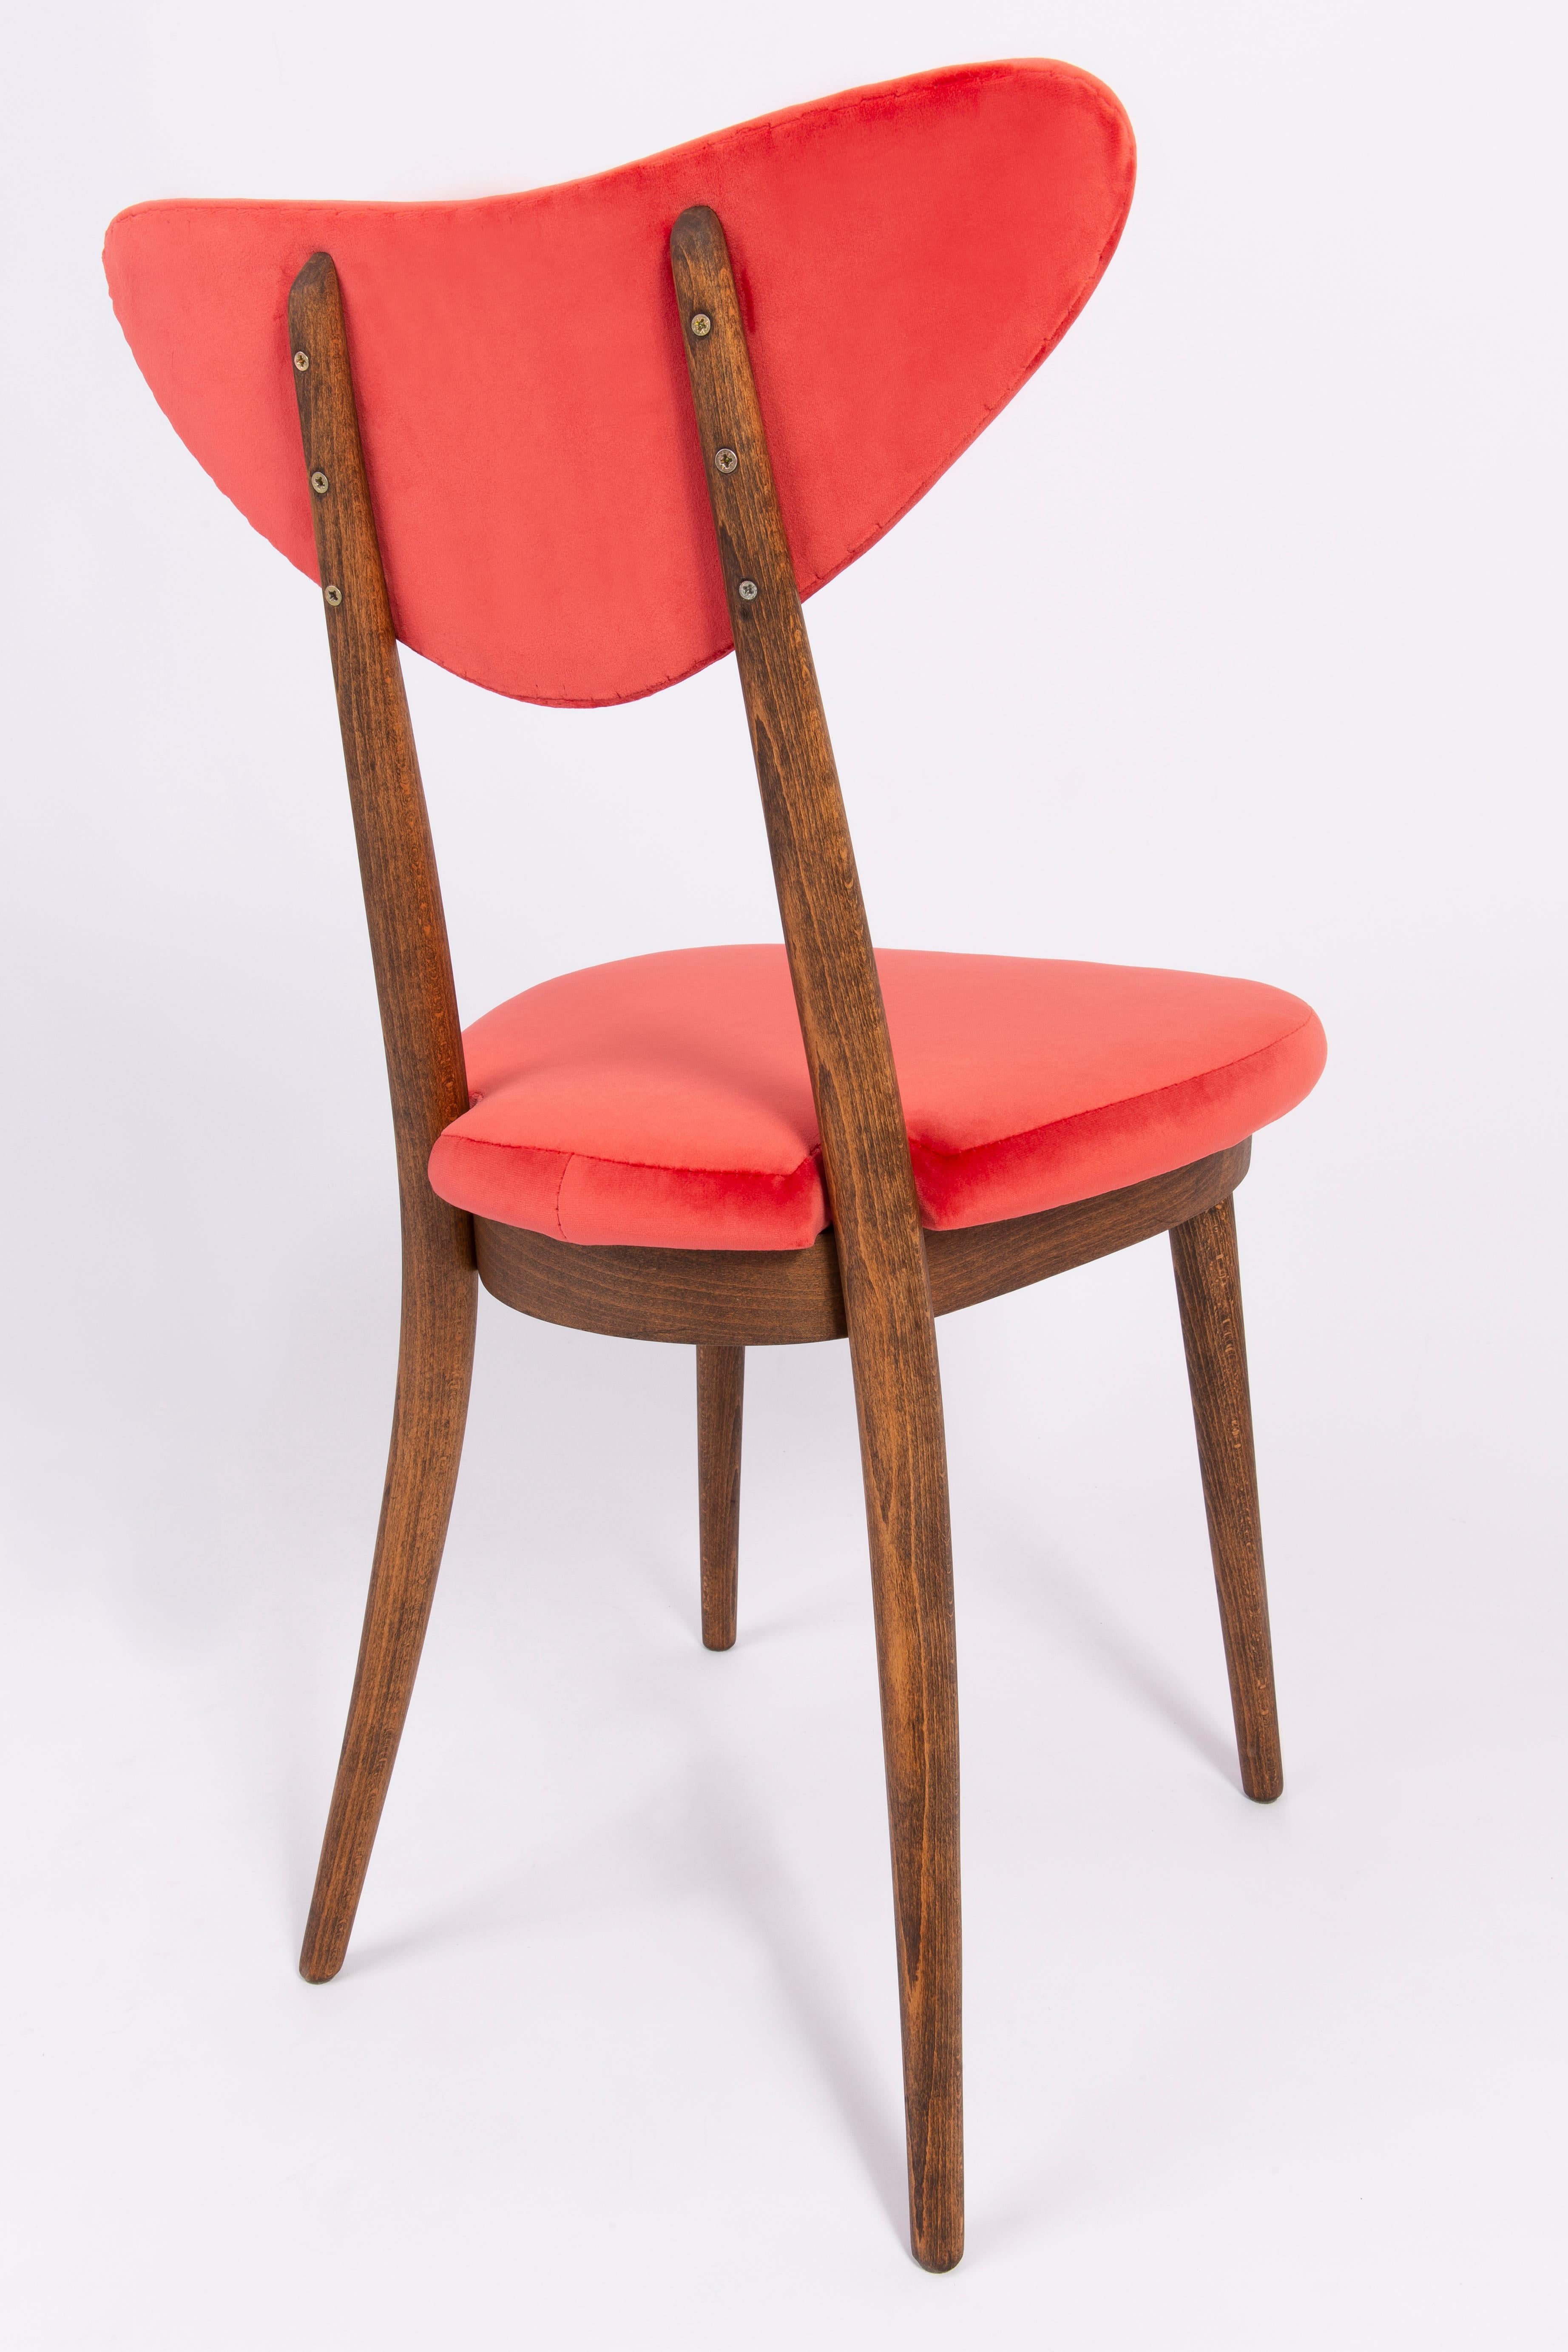 Set of Eight Red Heart Chairs, Poland, 1960s For Sale 3